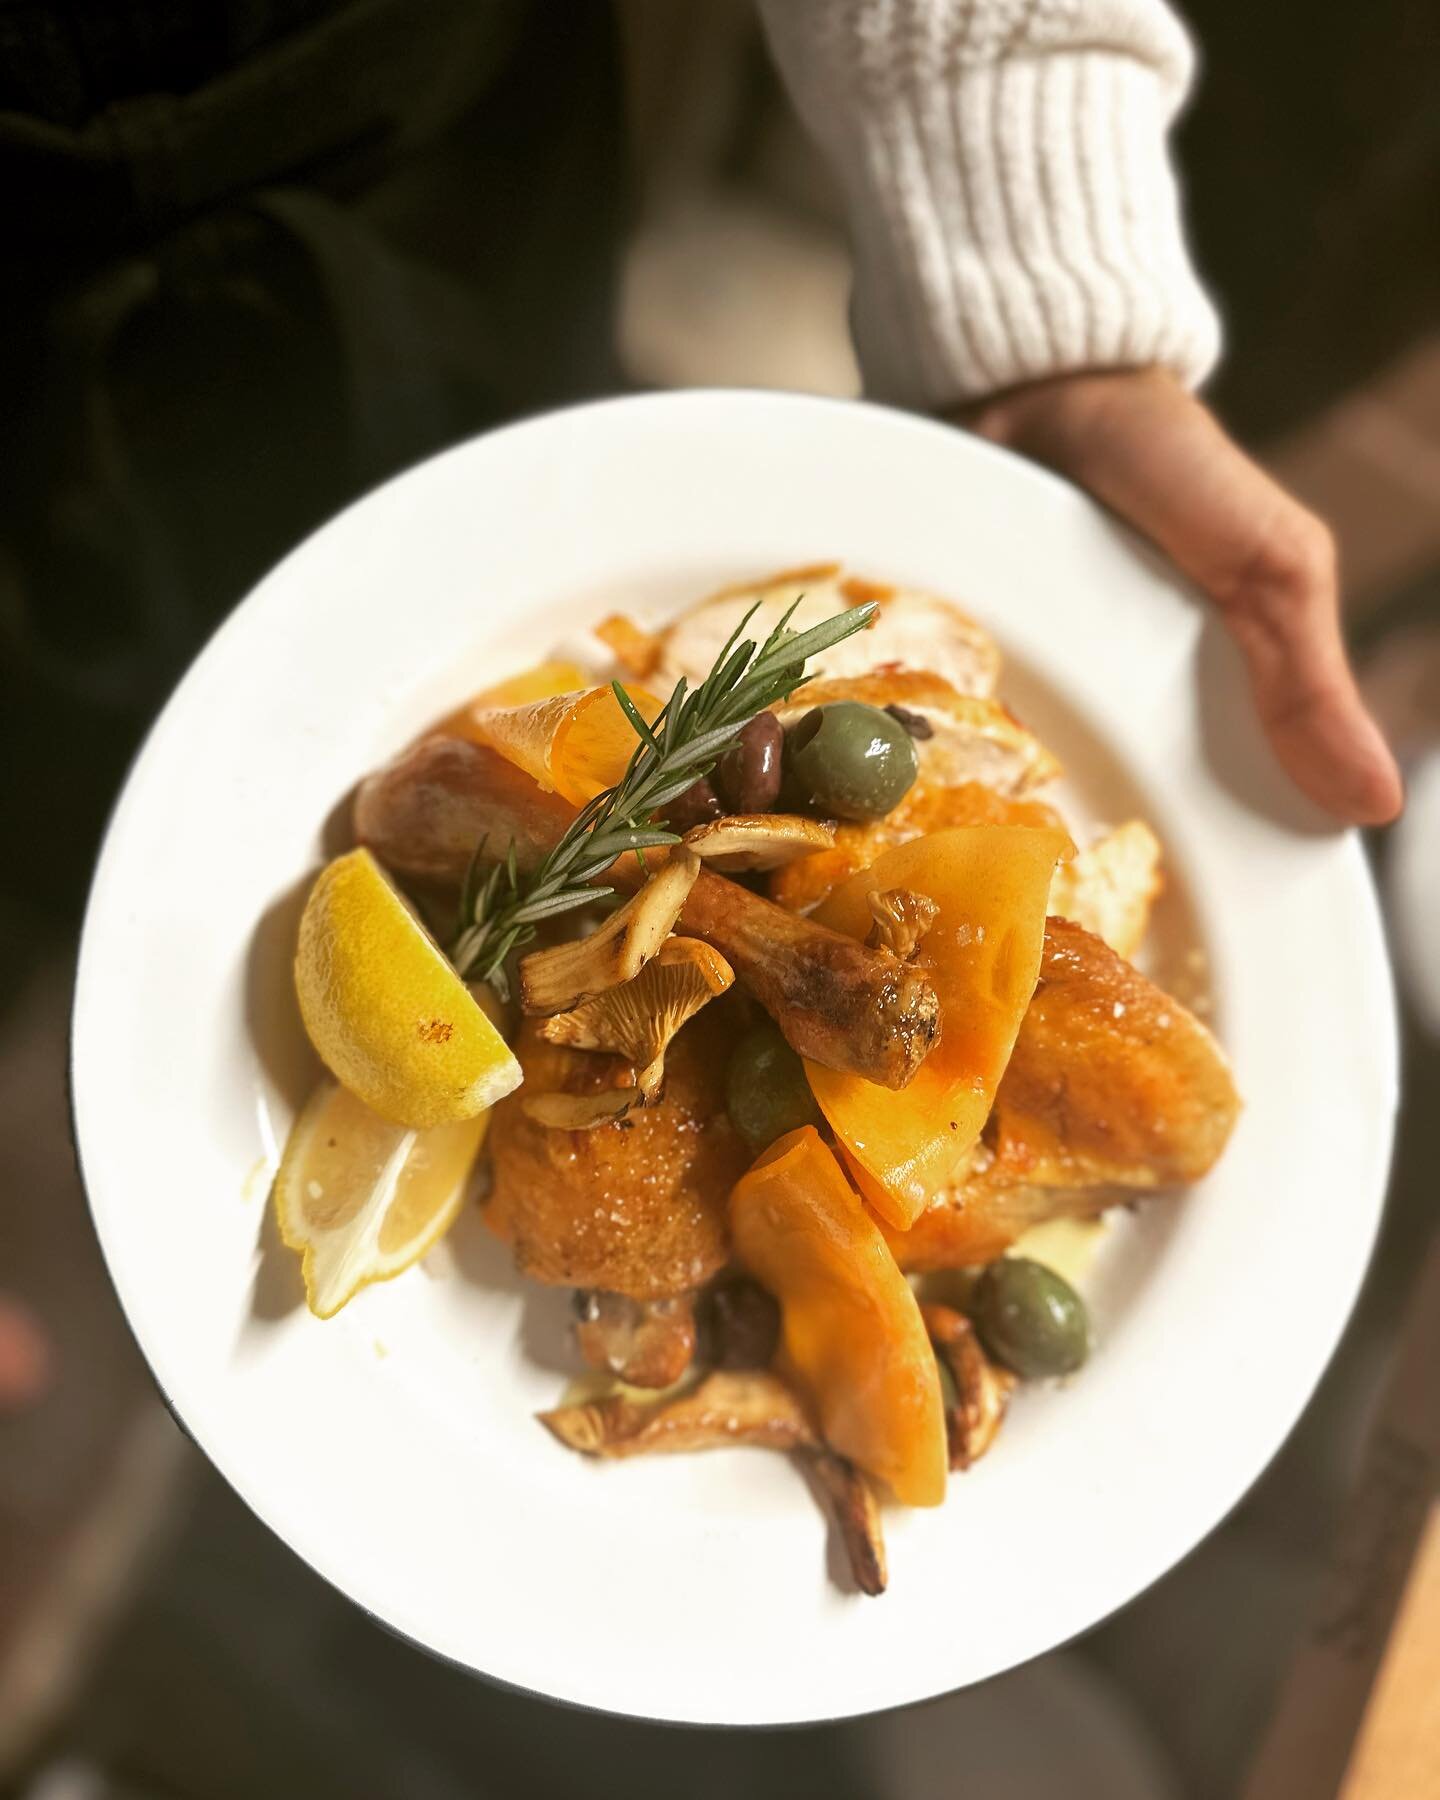 Cozy, Cozy with Roasted Chicken, Persimmons and Chanterelles. 

And 2 more weeks of uncorking for the kitties. All November corkage fees go to the amazing HART. 

@hartcambria